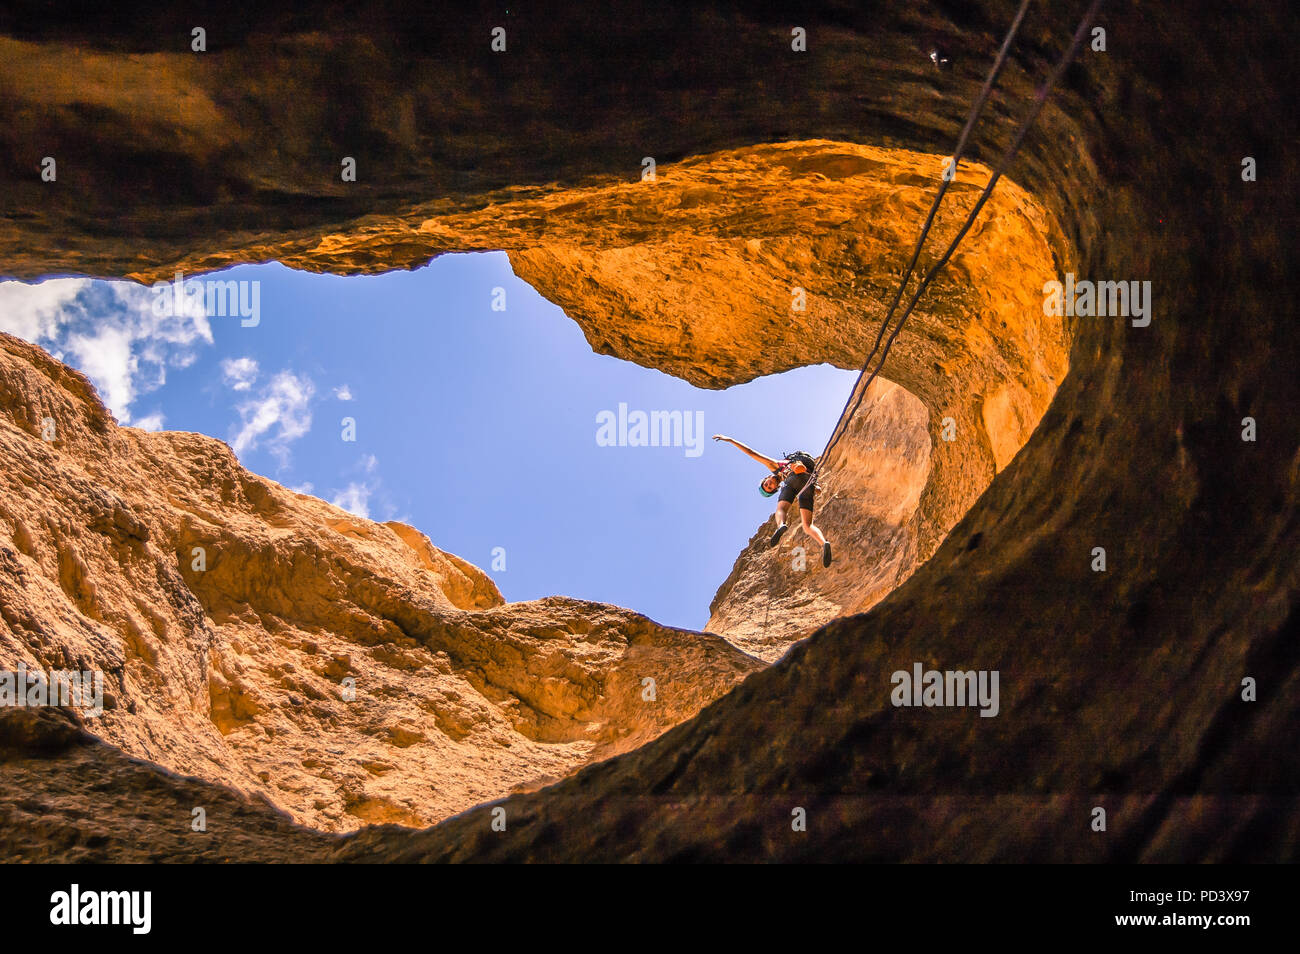 Man abseiling, low angle view, Smith Rock State Park, Terrebonne, Oregon, United States Stock Photo